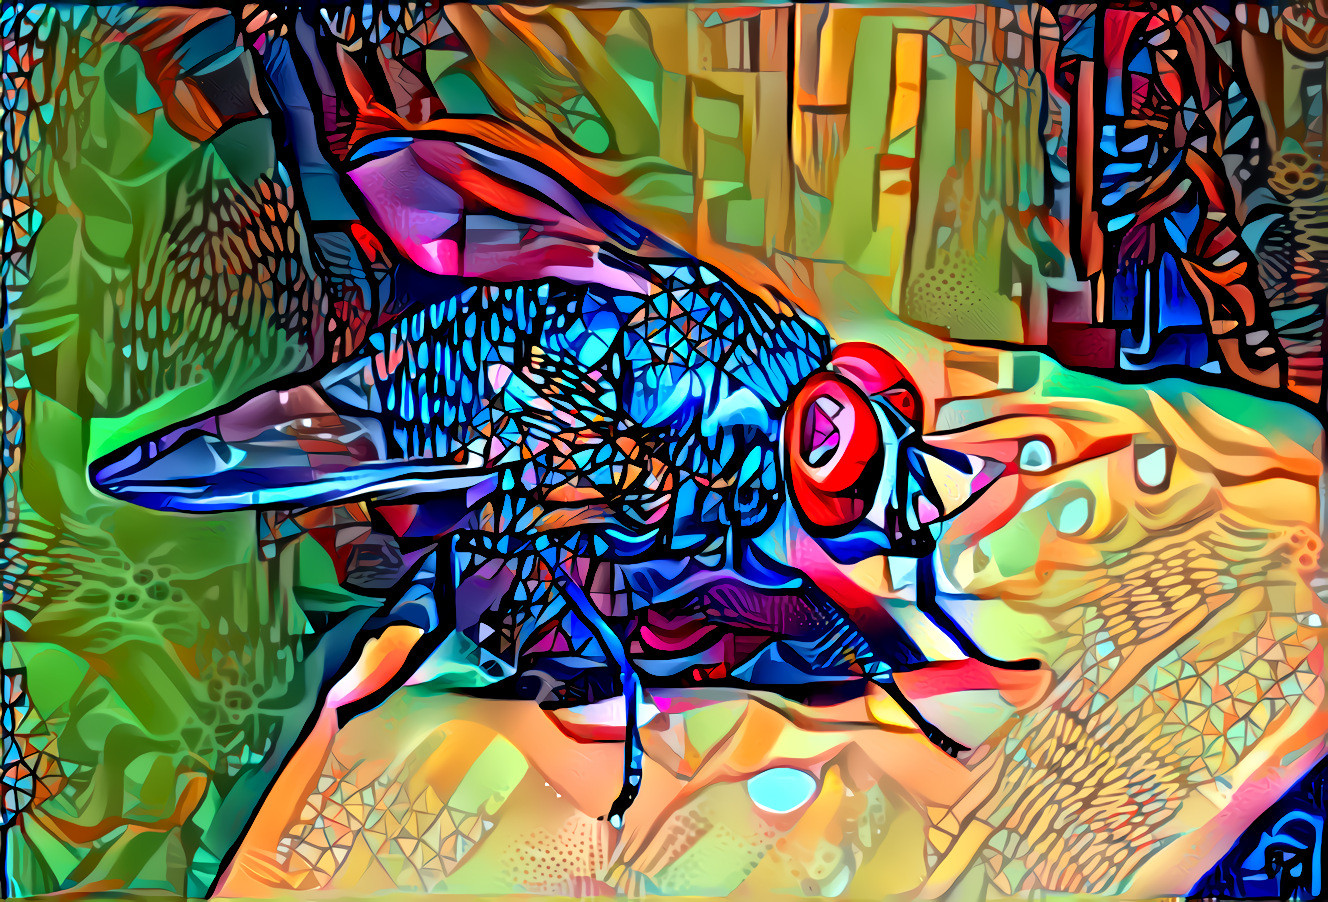 The blue fly